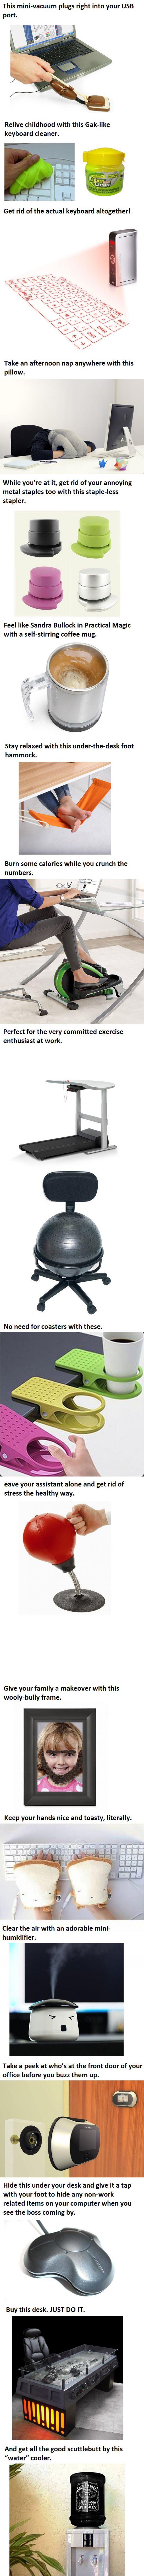 20 Clever Office Products That Will Make Your Work Life So Much Easier. -   Misc